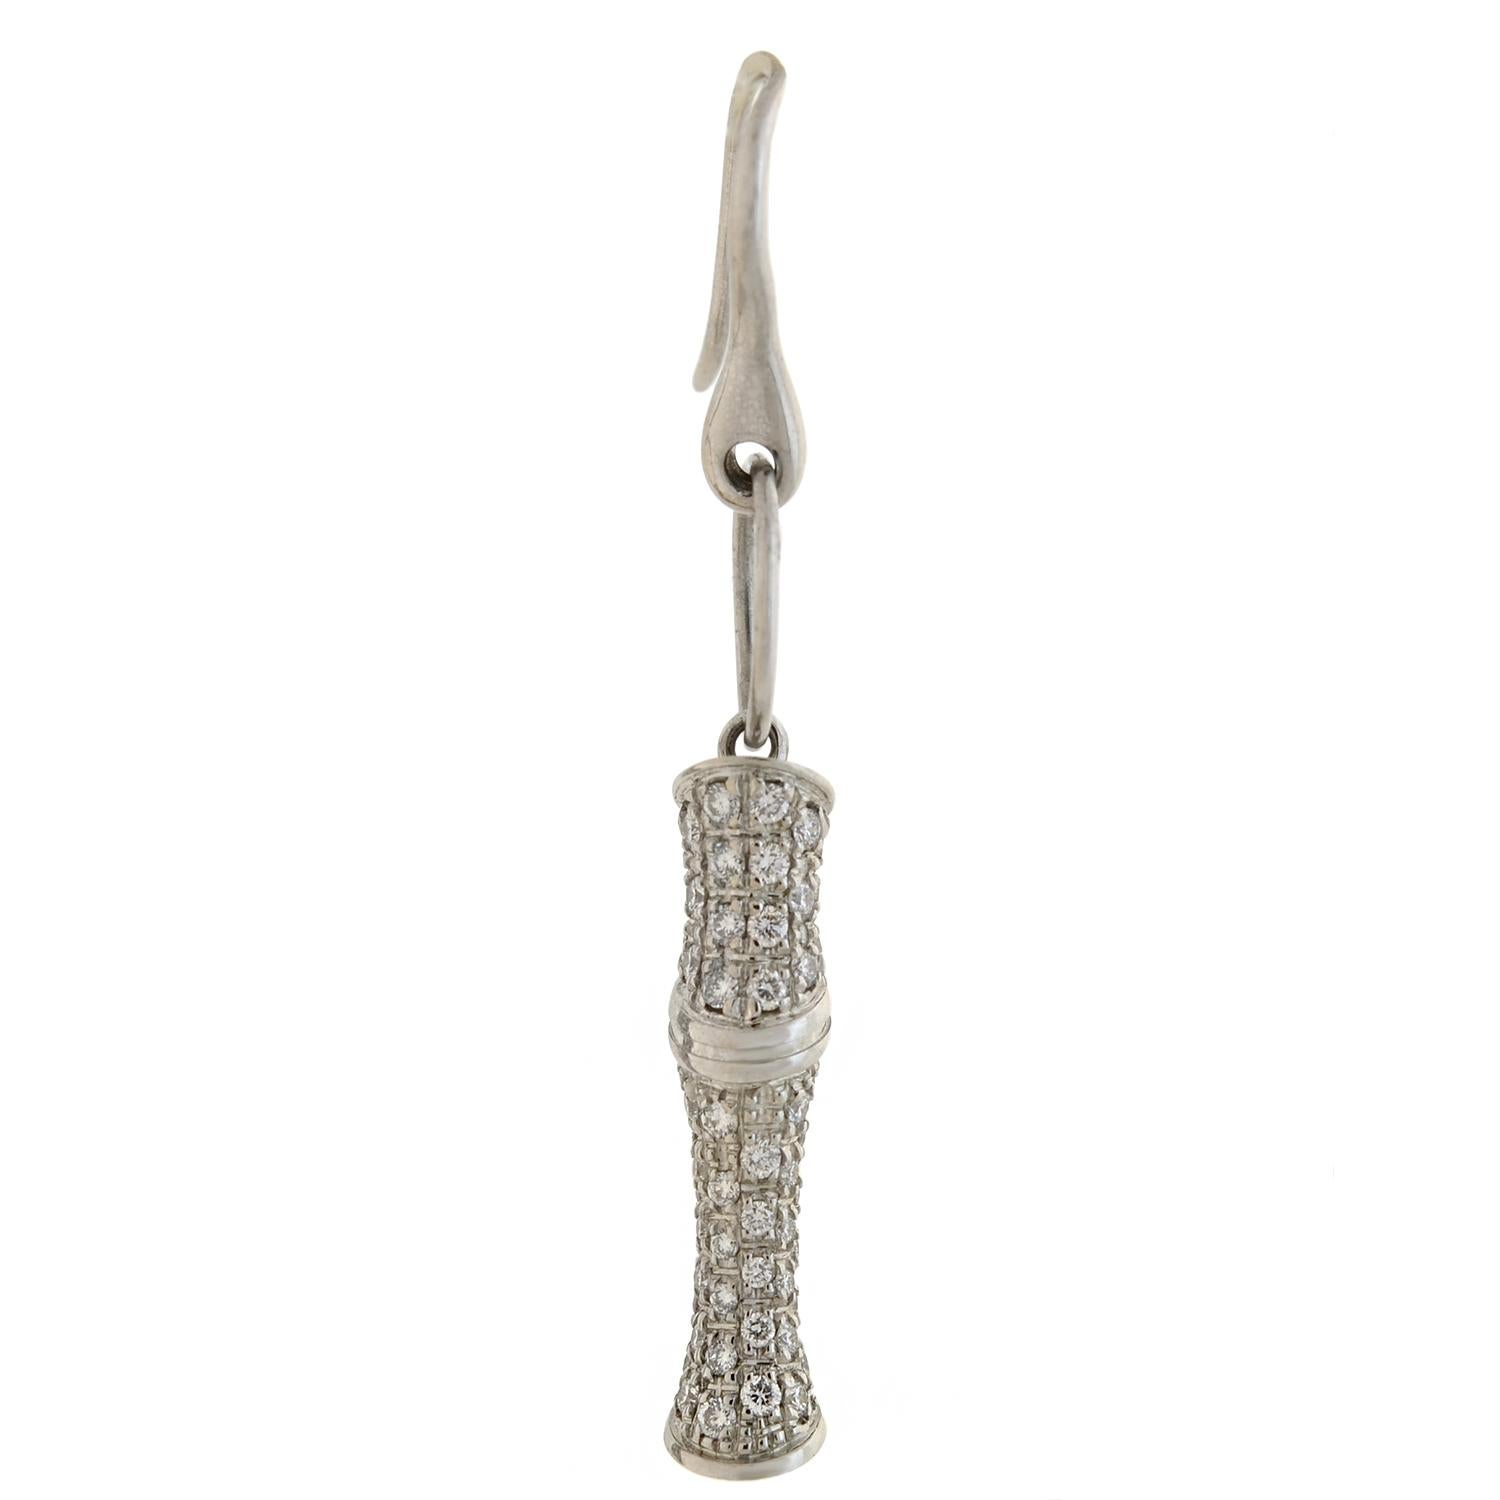 A stylish pair of estate Gucci earrings! Crafted in 18kt white gold, each earring has a 3-dimensional bamboo motif, completely encrusted with sparkling pavé diamonds. White gold wires and jump rings are attached to the top, allowing the bamboo